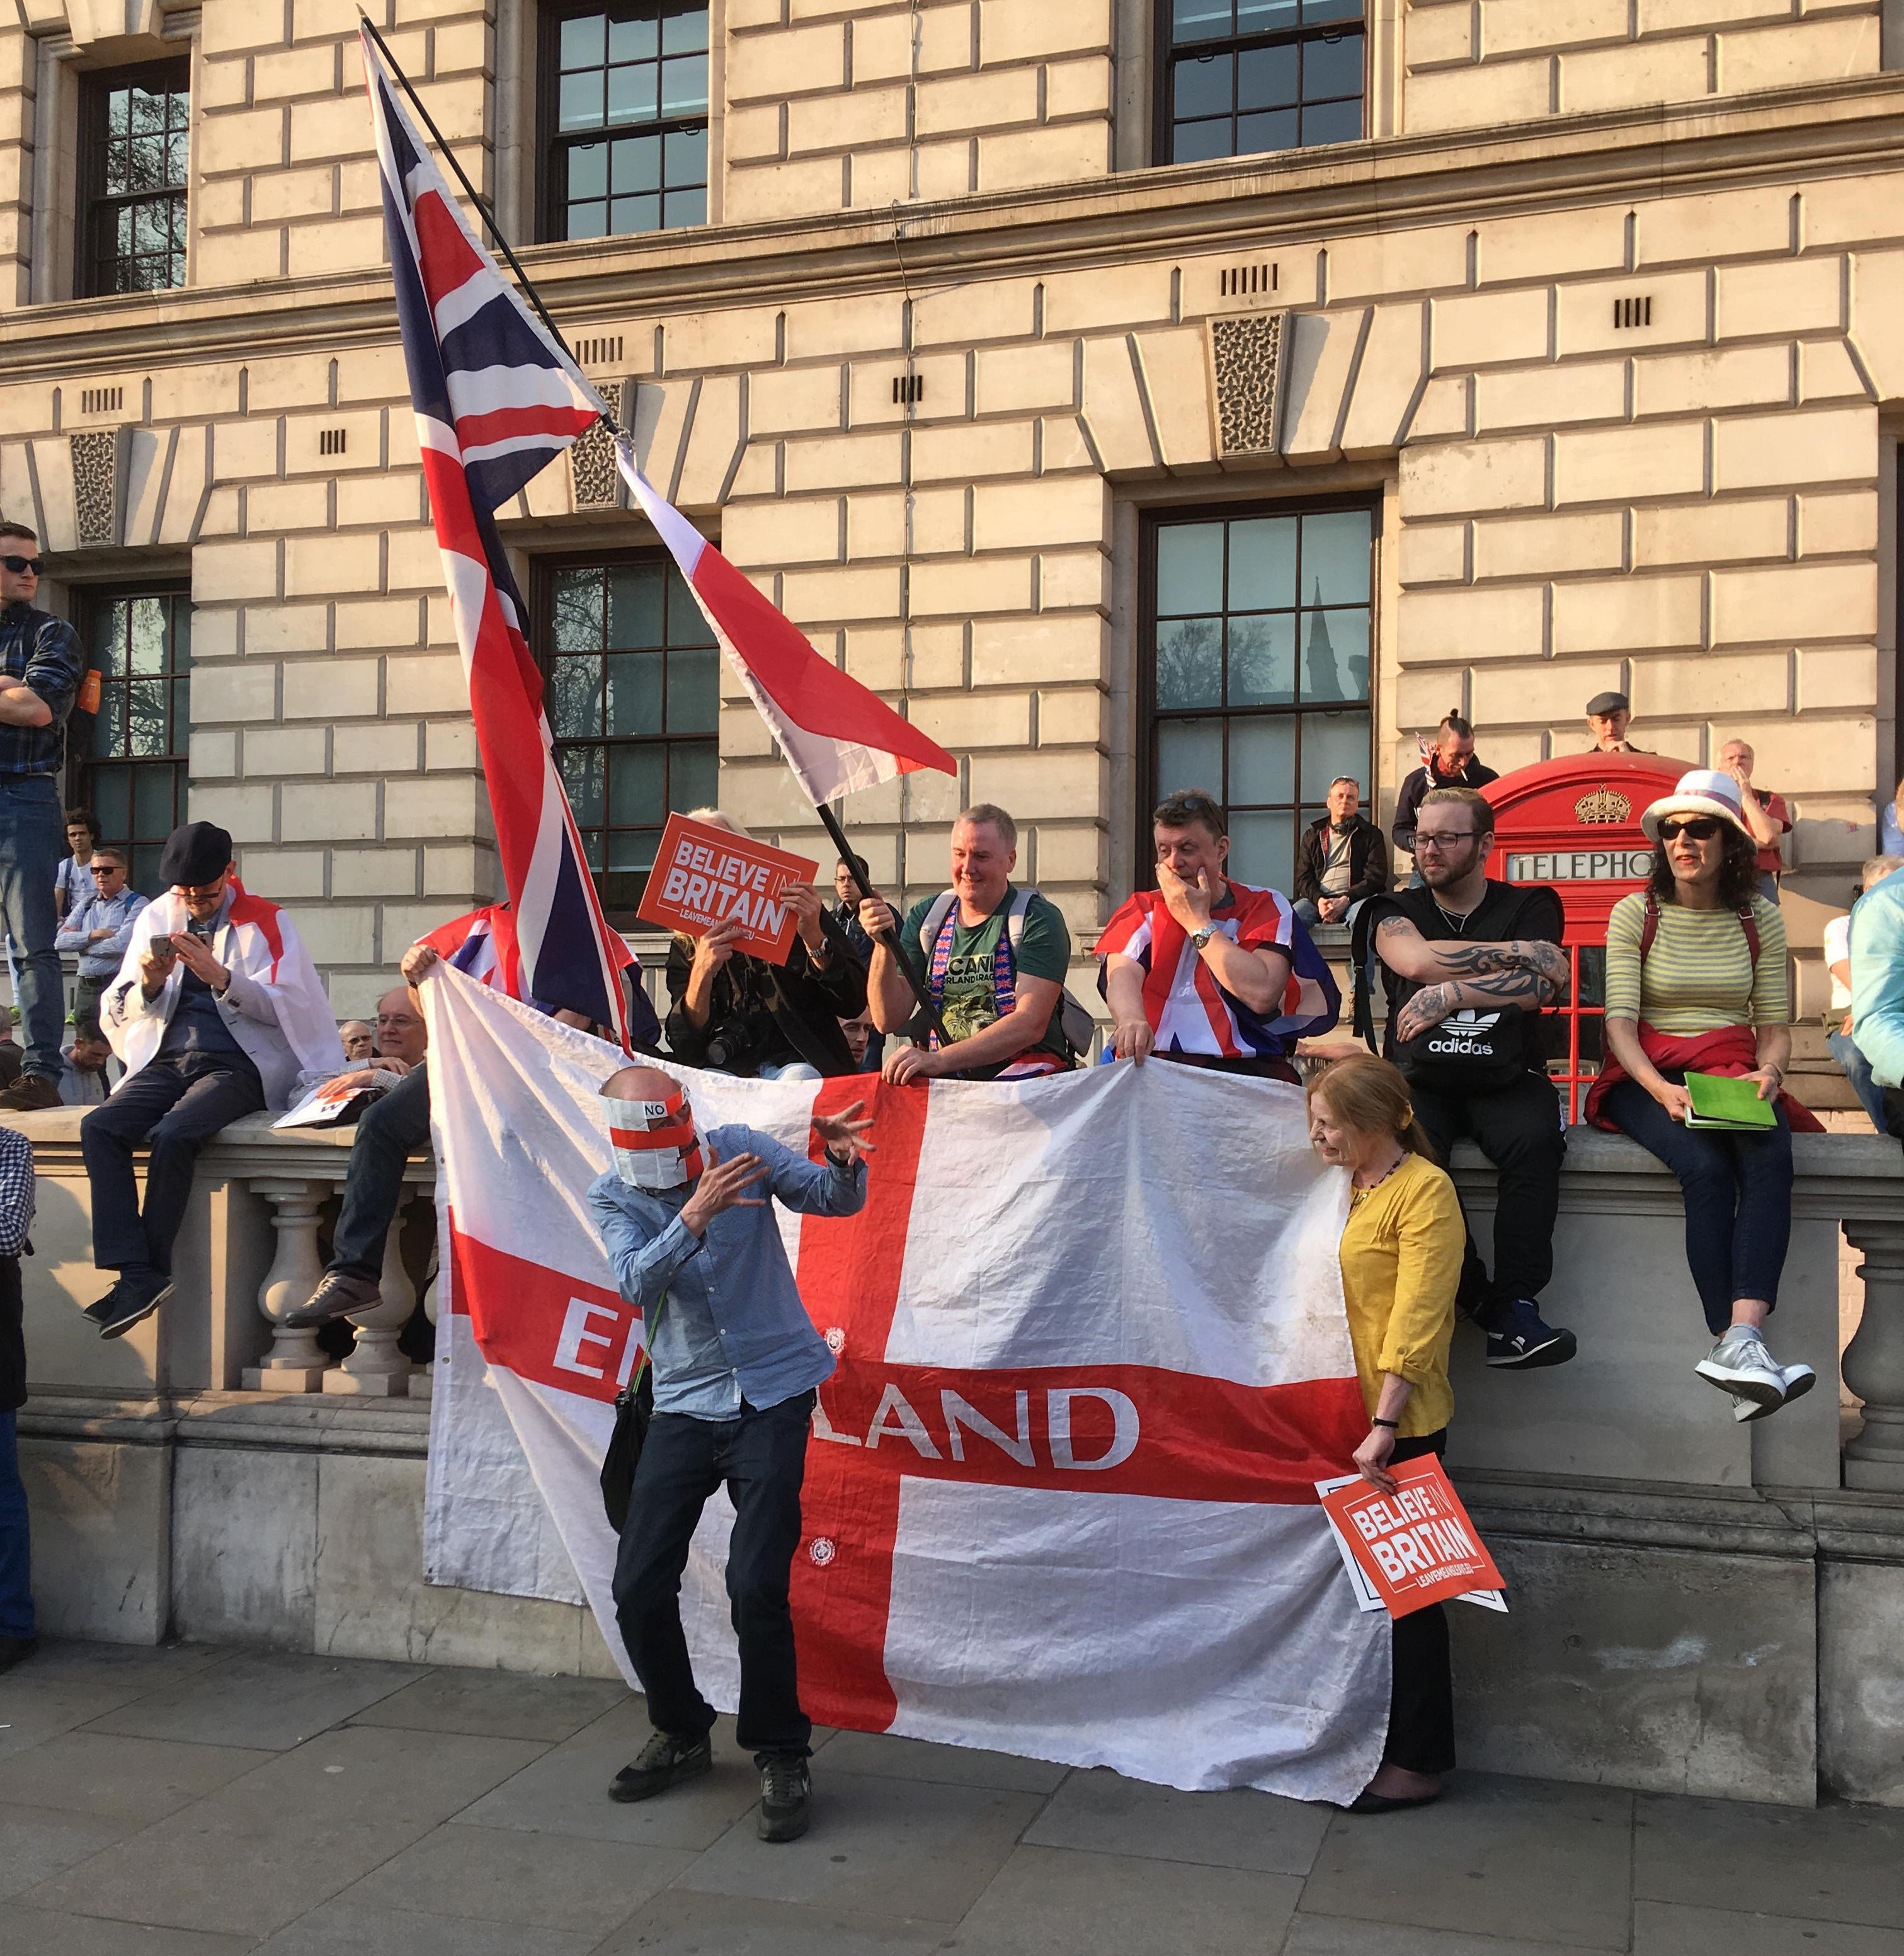 Pro-Leave rallies descend on Parliament Square in angry Brexit demonstration